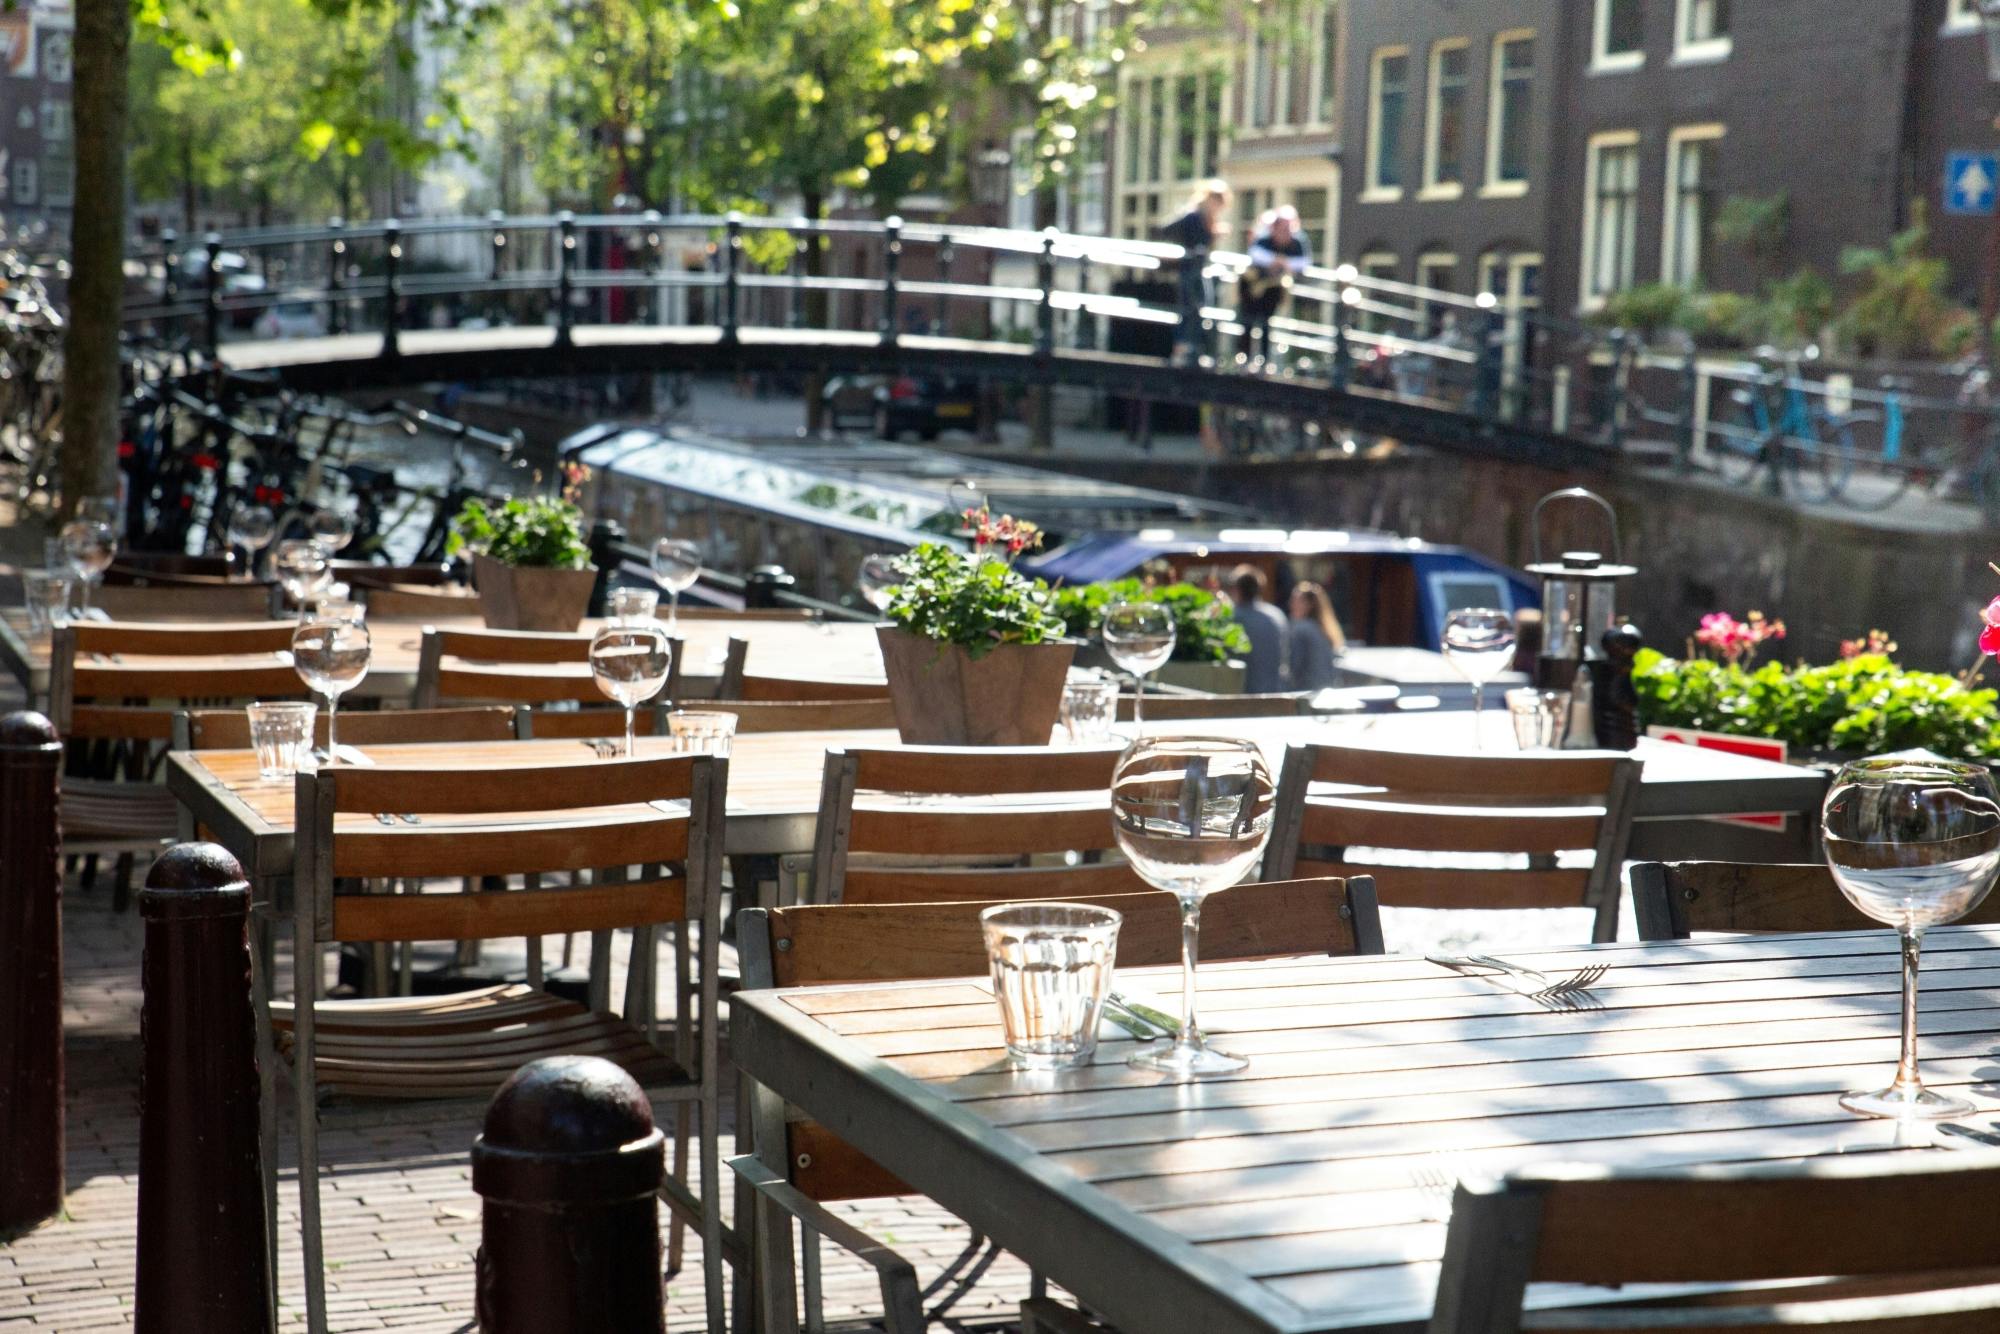 Private walking food tour in Amsterdam